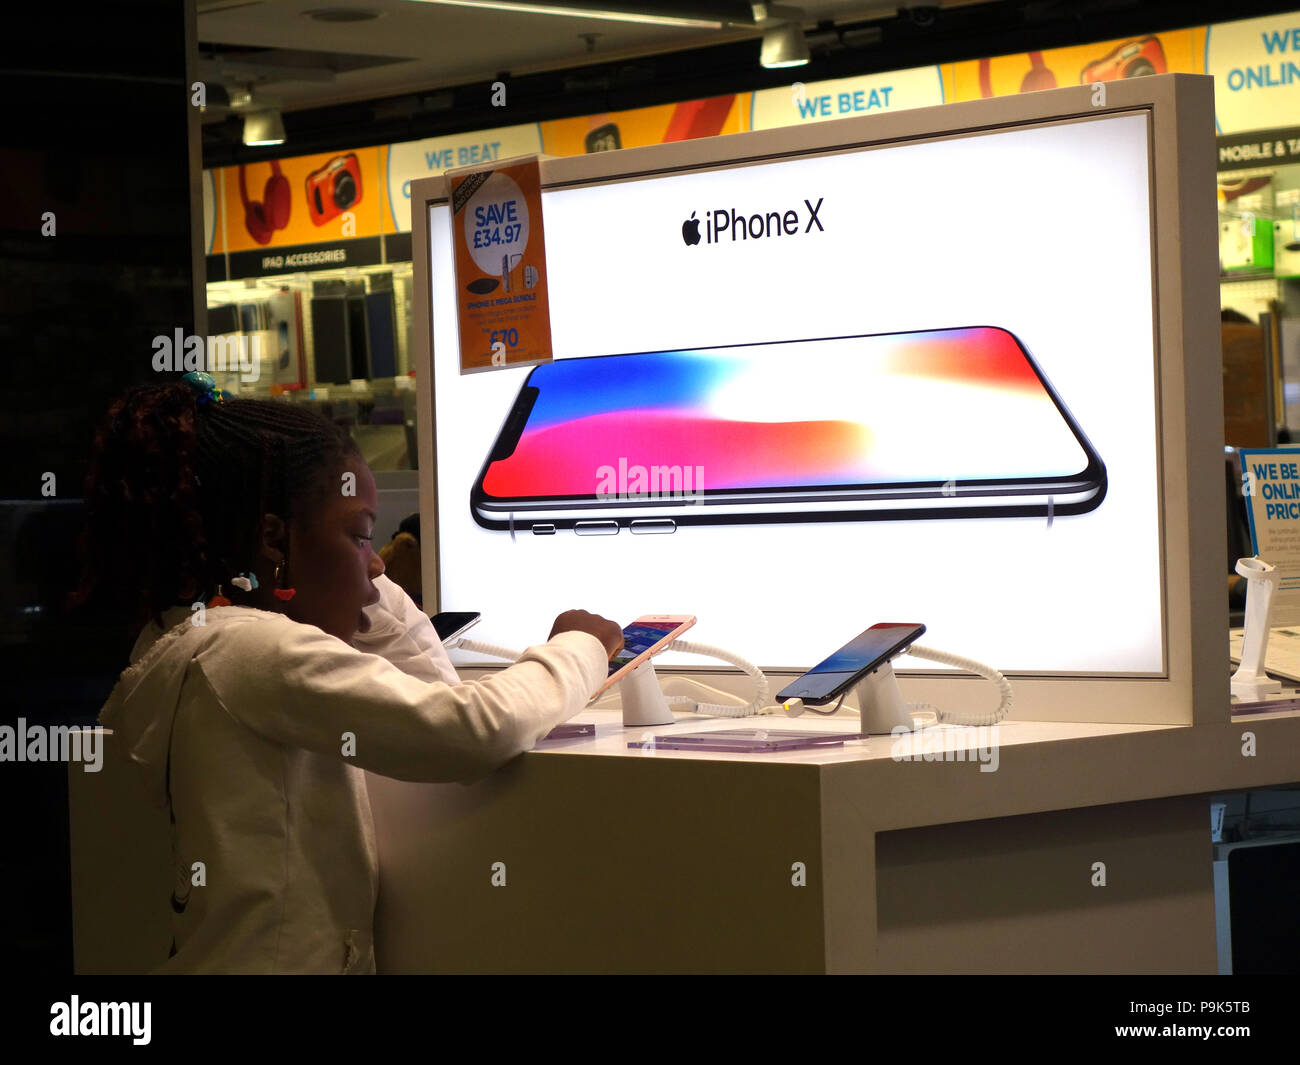 Young people looking at the electronic items on sale in the Duty Free Lounge Electronic section at Manchester Airport. IPhone X Advert Stock Photo